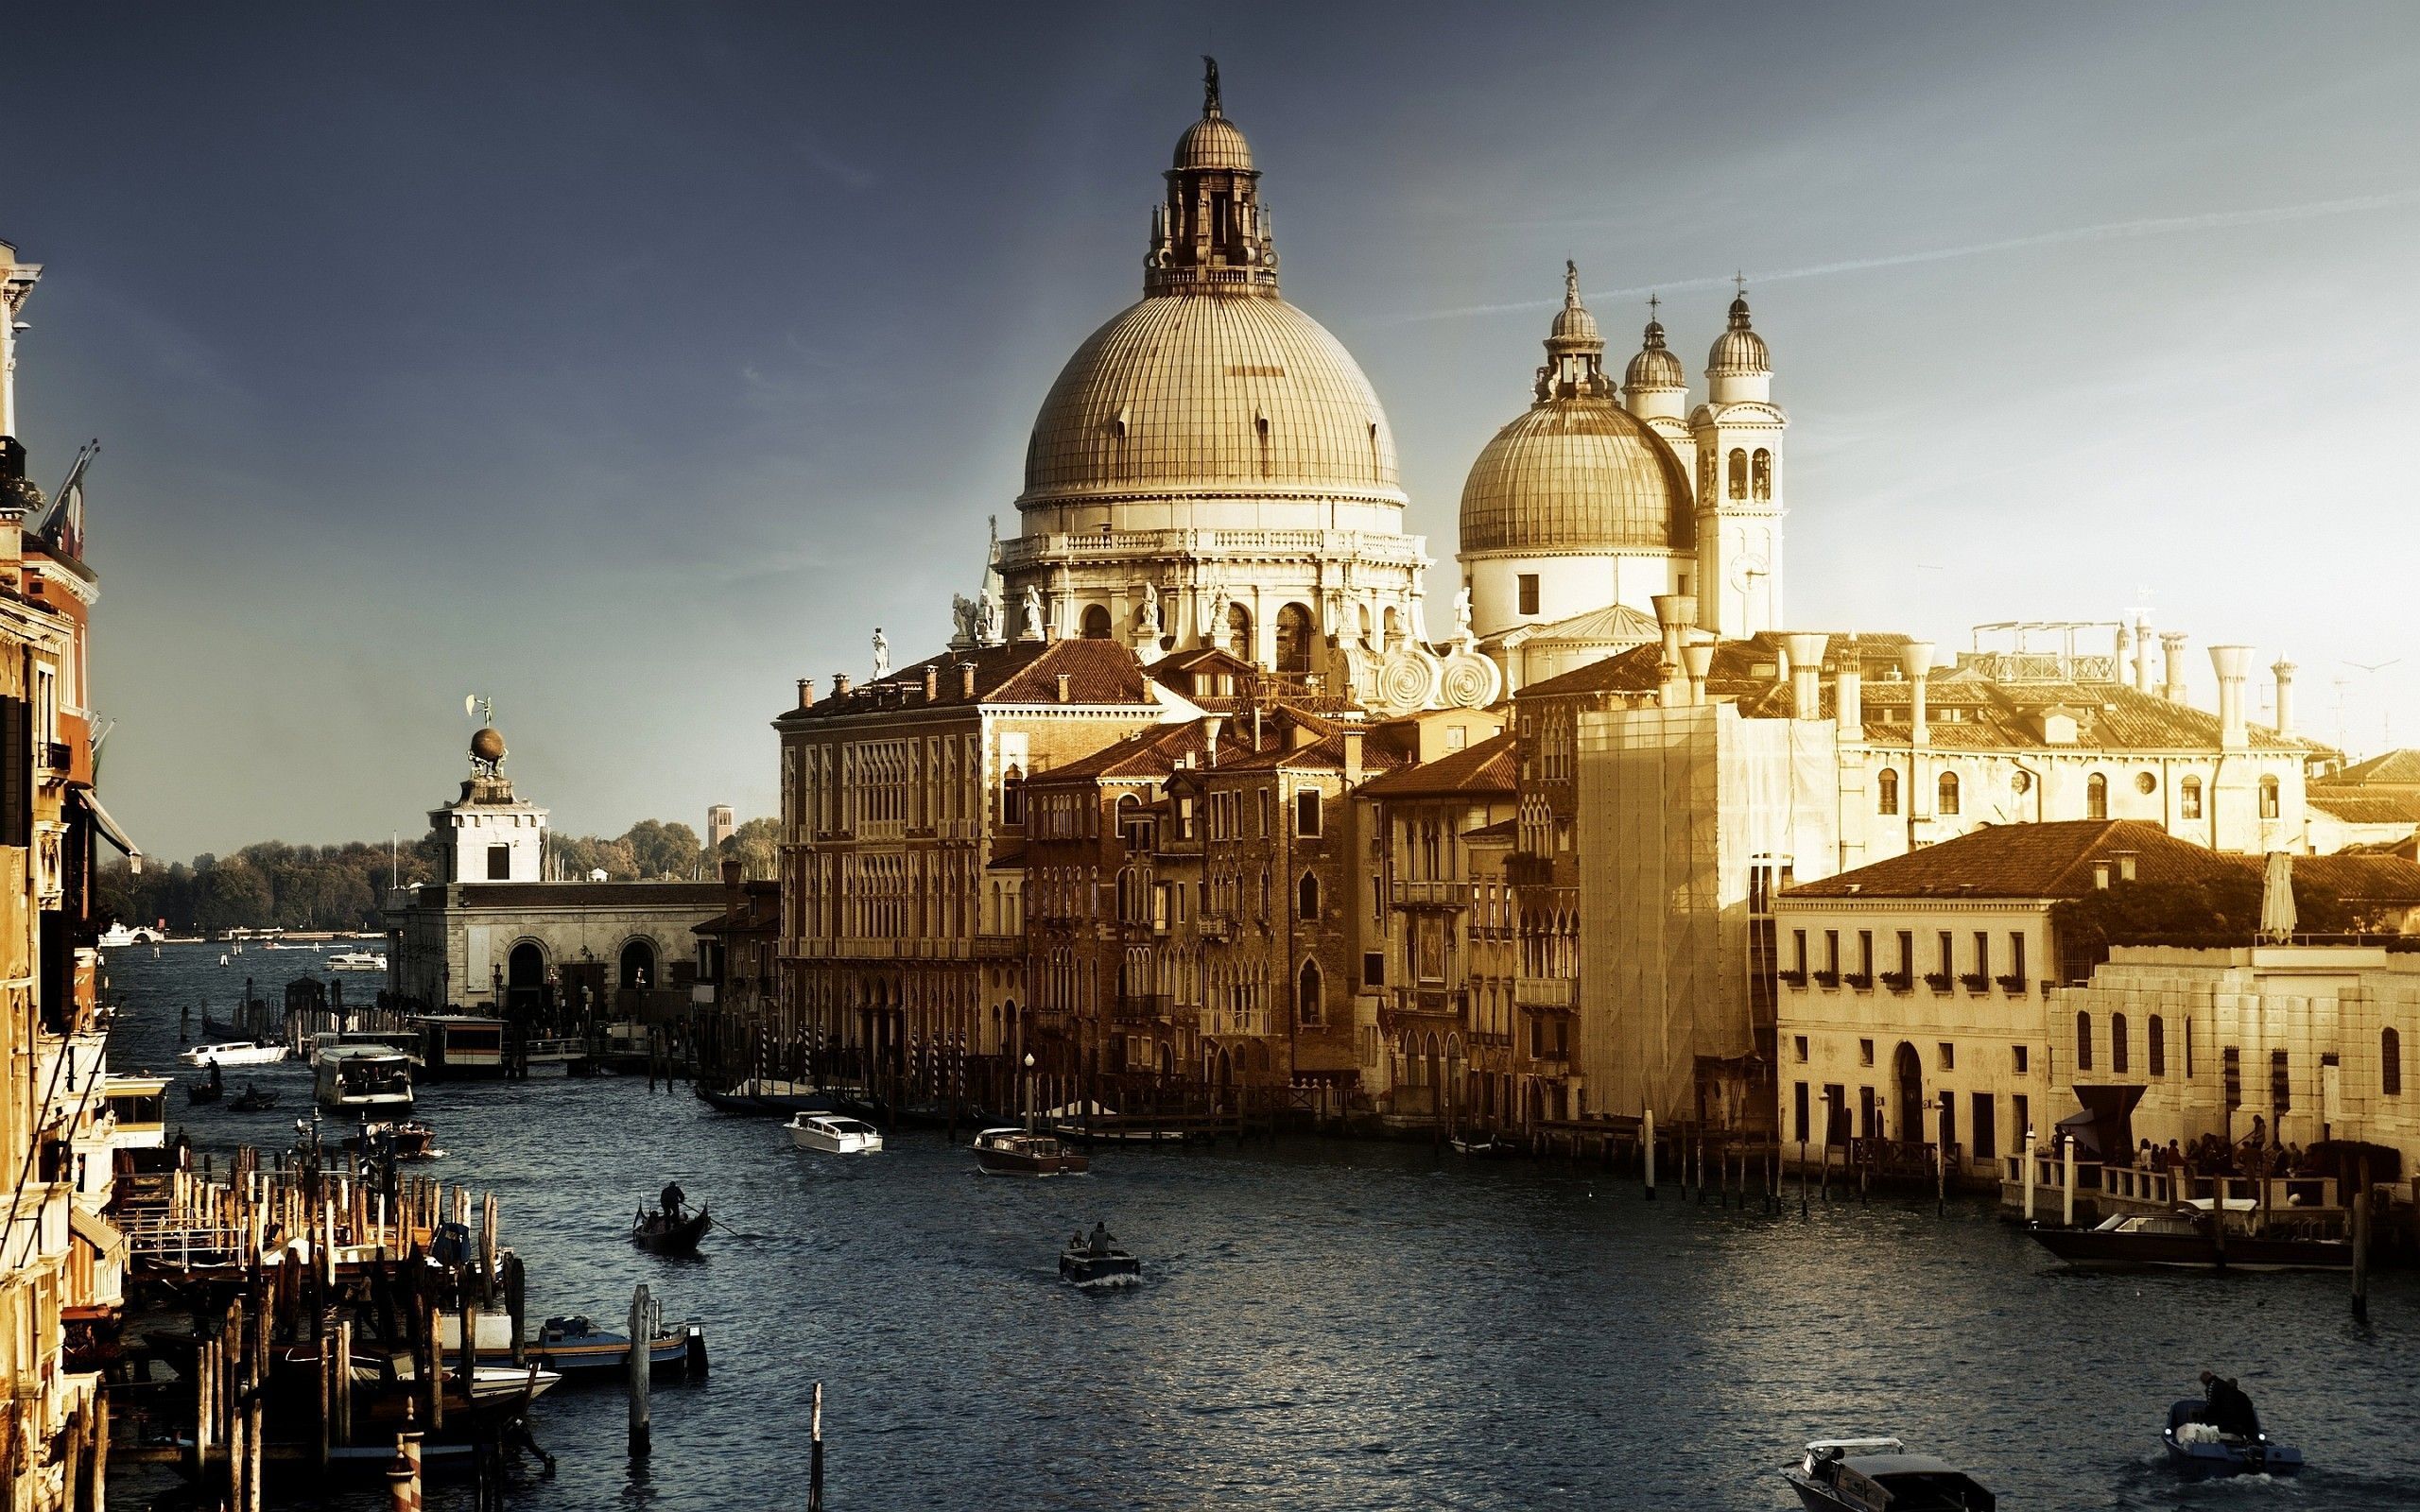 Top Beautiful Venice Images for Pinterest